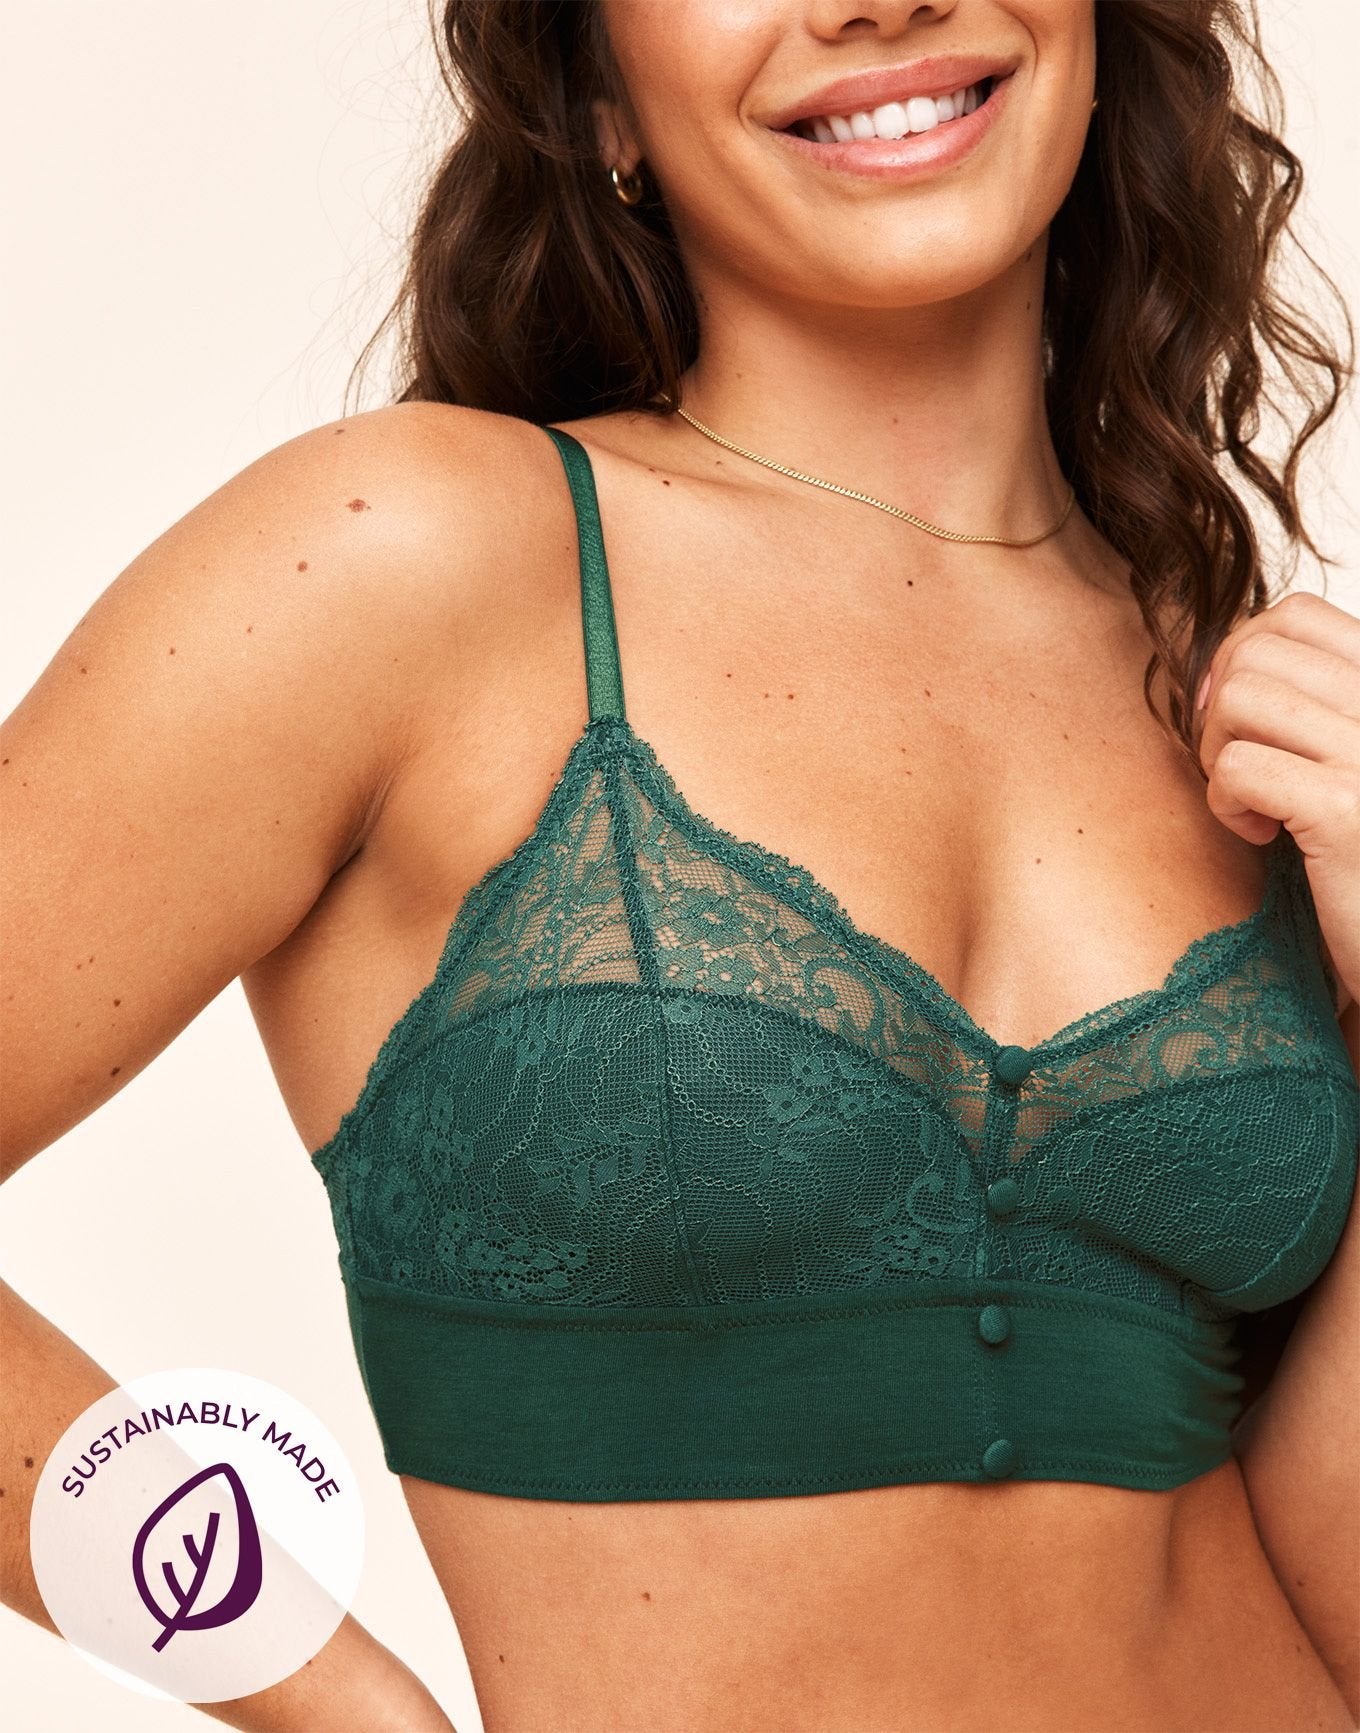 Adore Me Anja Unlined Bralette in color Trekking Green and shape bralette